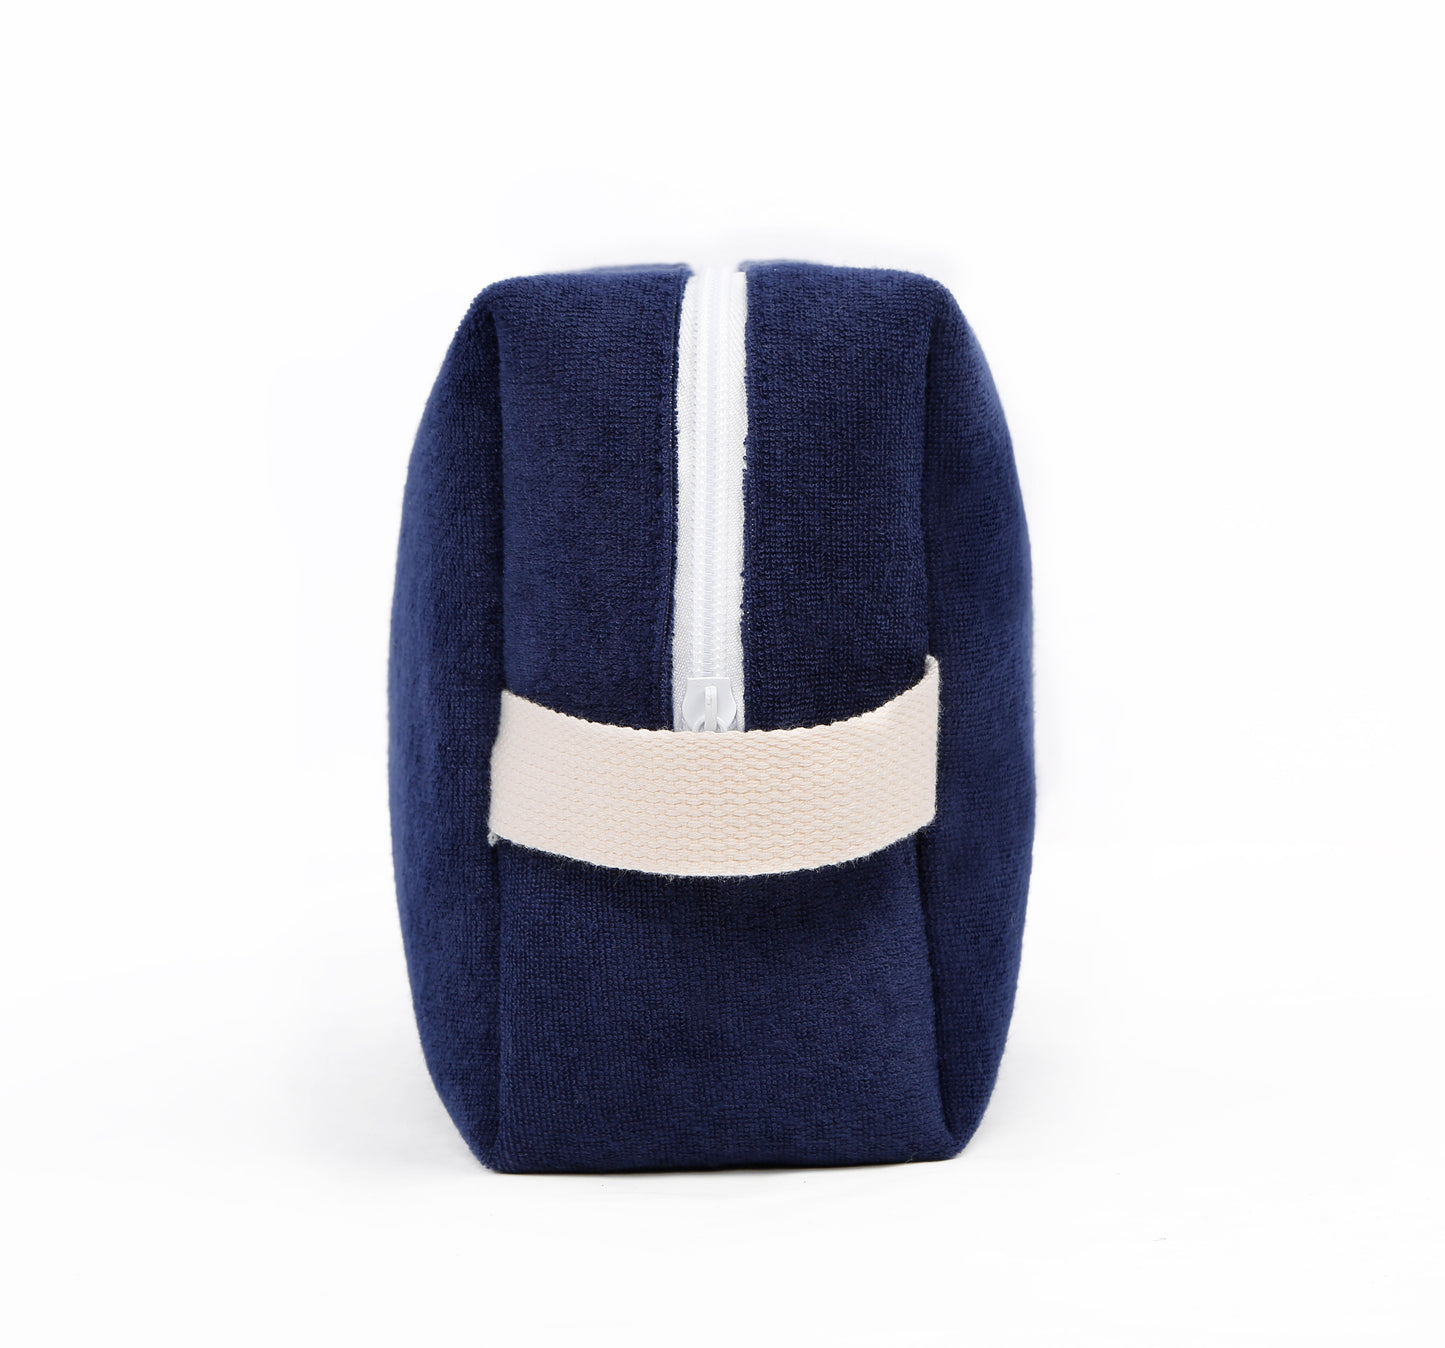 'Chace' Case - Nautical